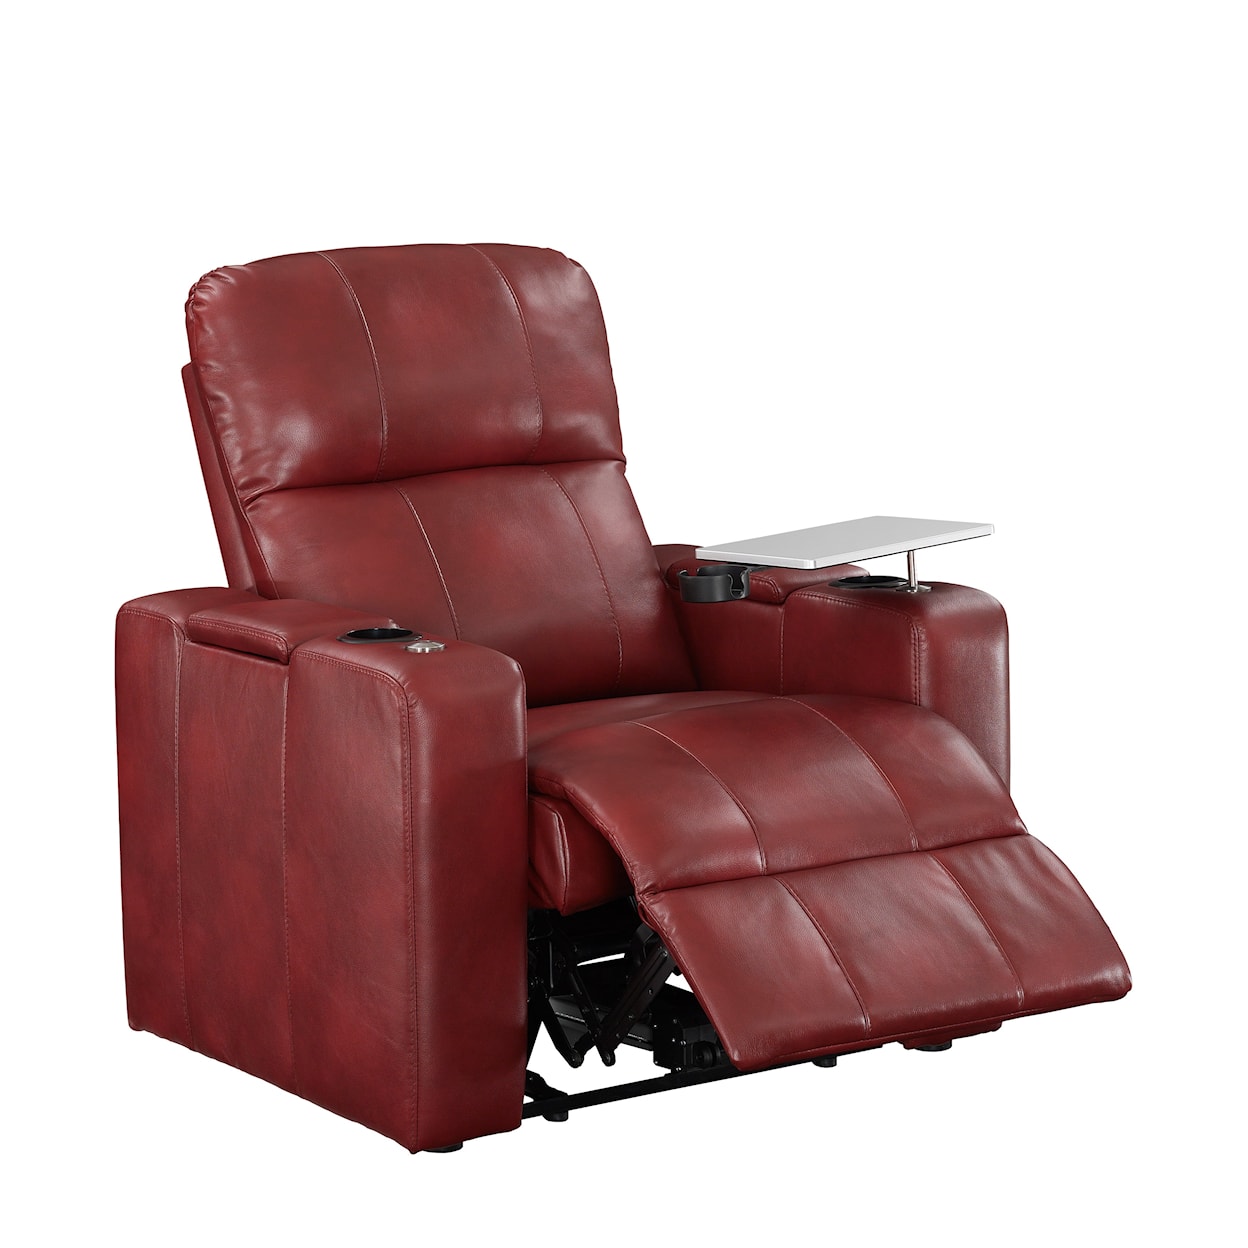 Prime Resources International Larson Home Theater Recliner